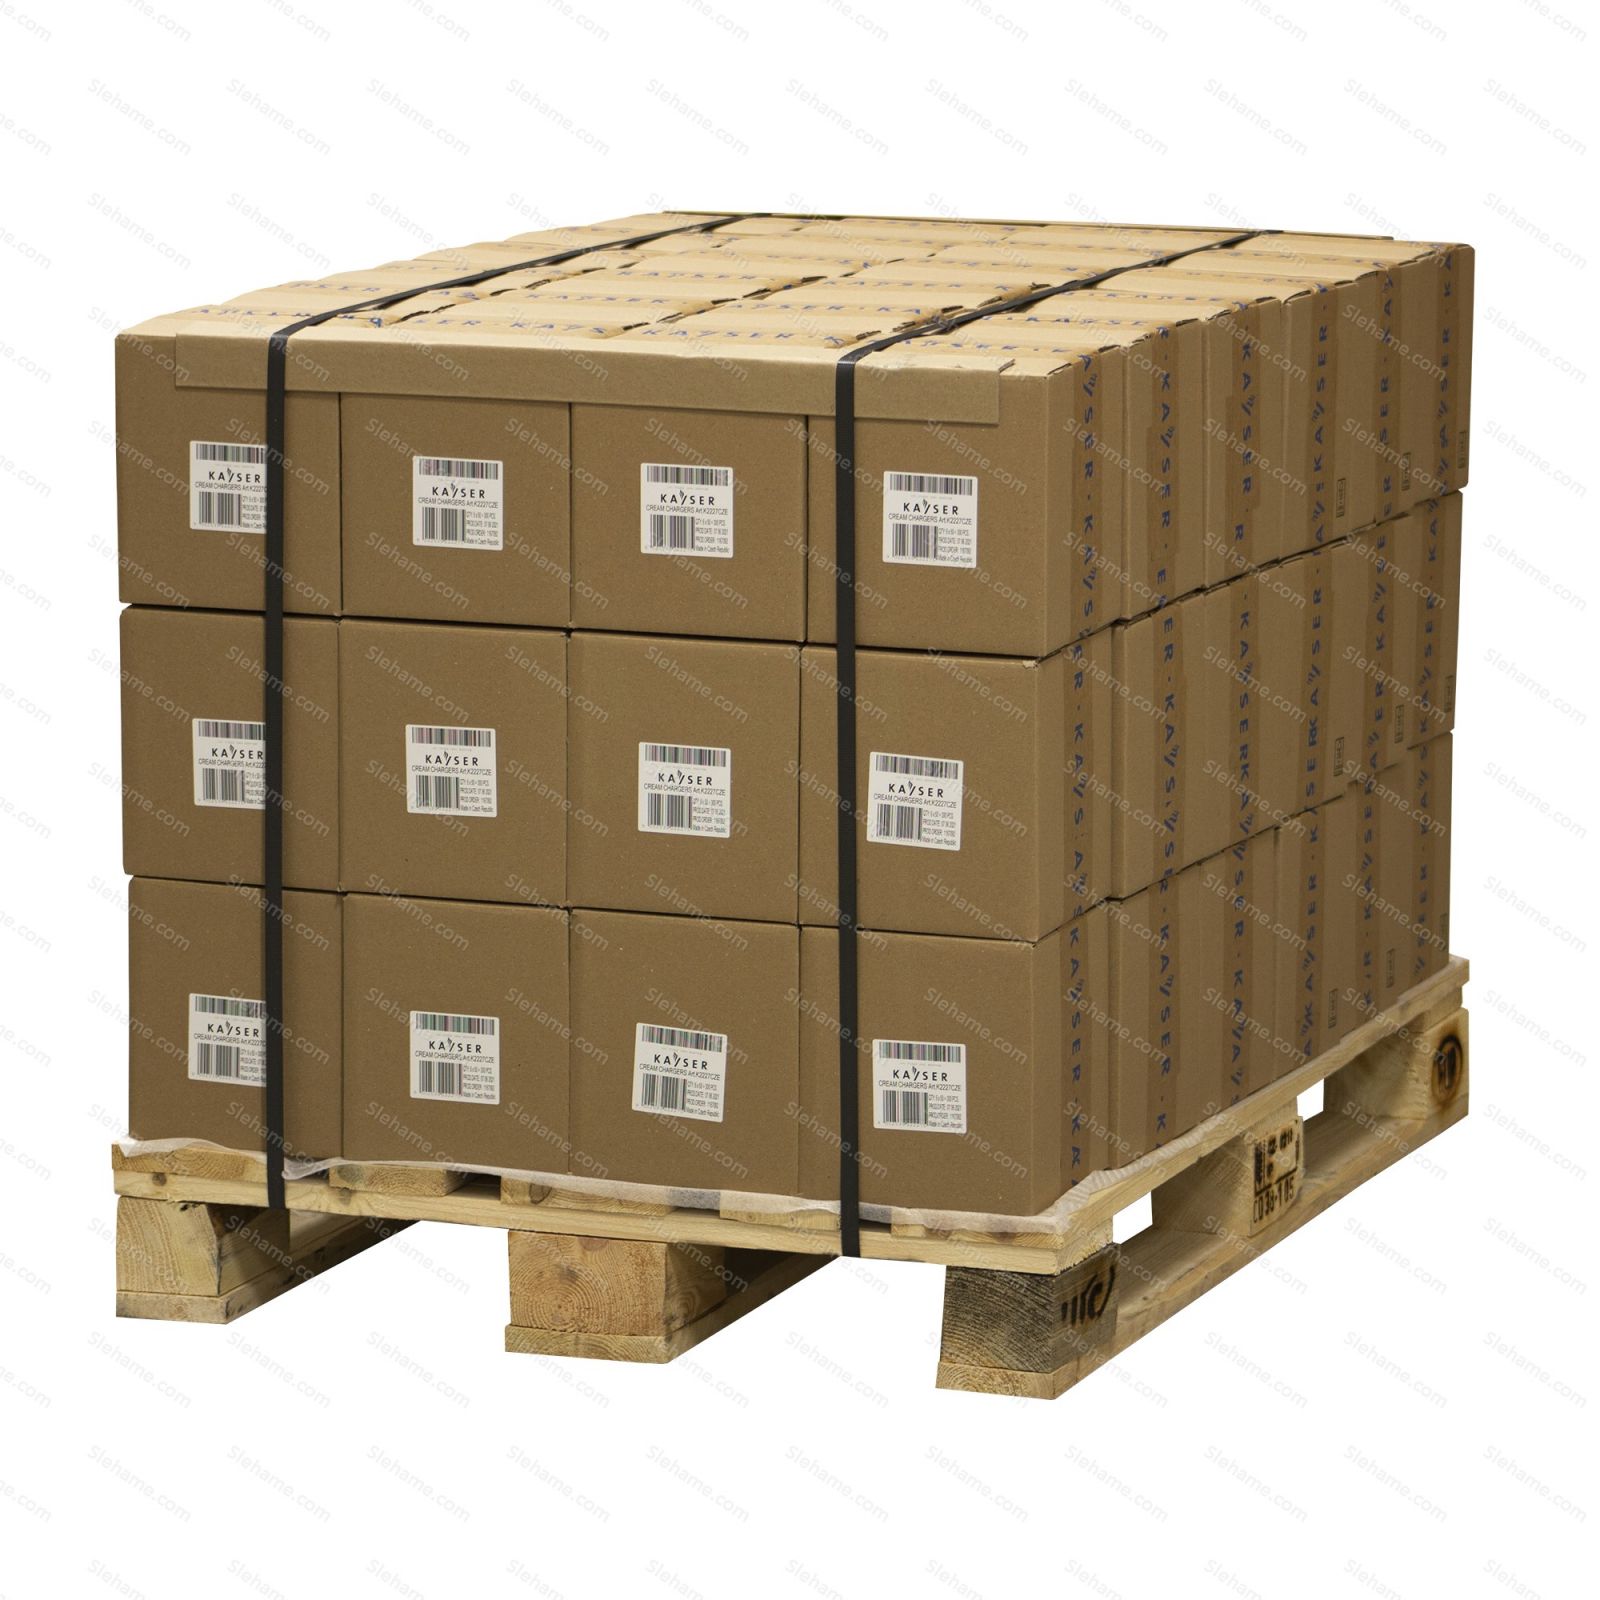 Cream chargers Kayser 7.5 g N2O, 50 pcs (EUR pallet) - main view of pallet